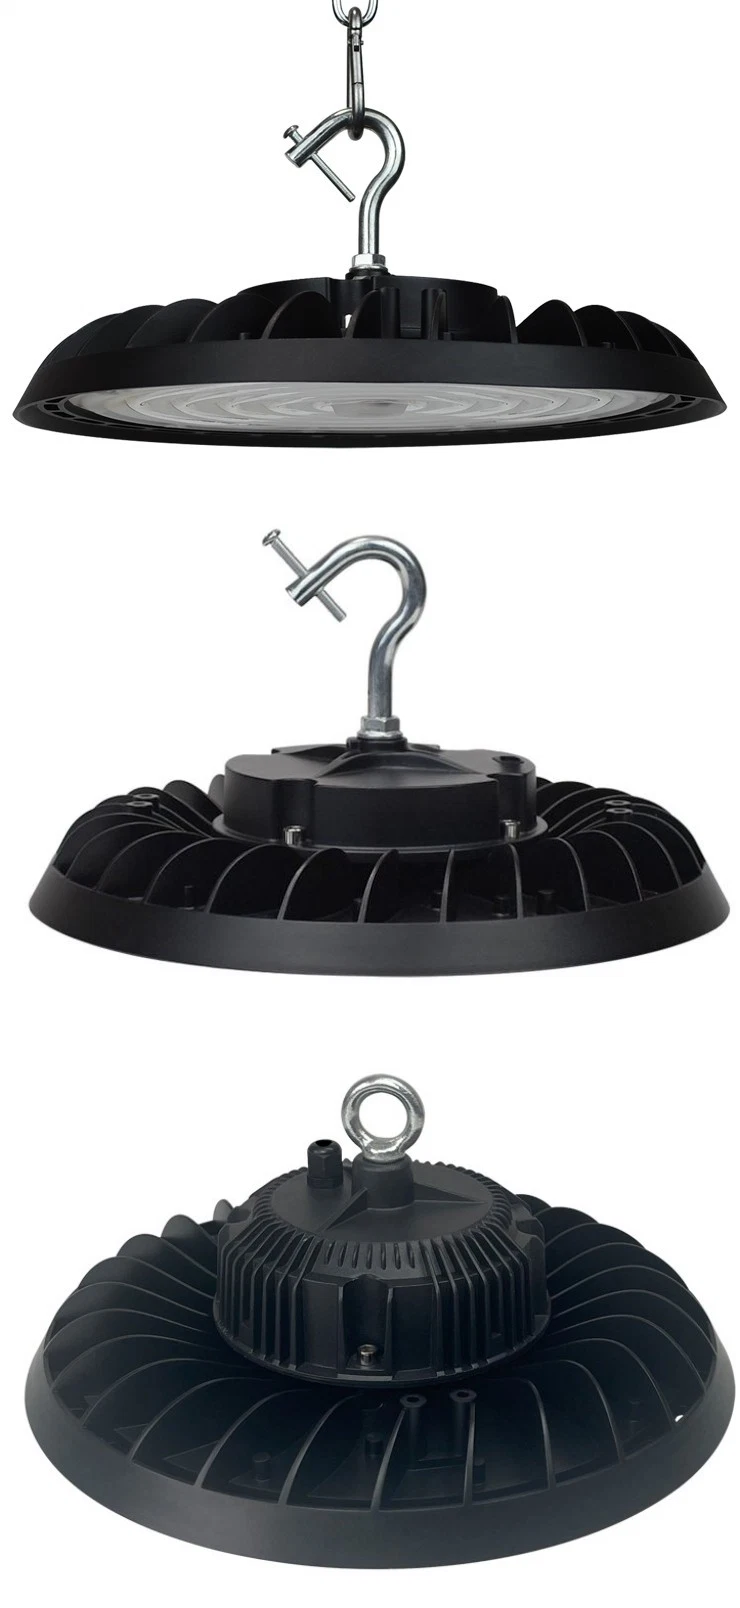 Company Direct Price 5 Years Warranty Isolated Driver 150W 150lm/W UFO LED High Bay Light